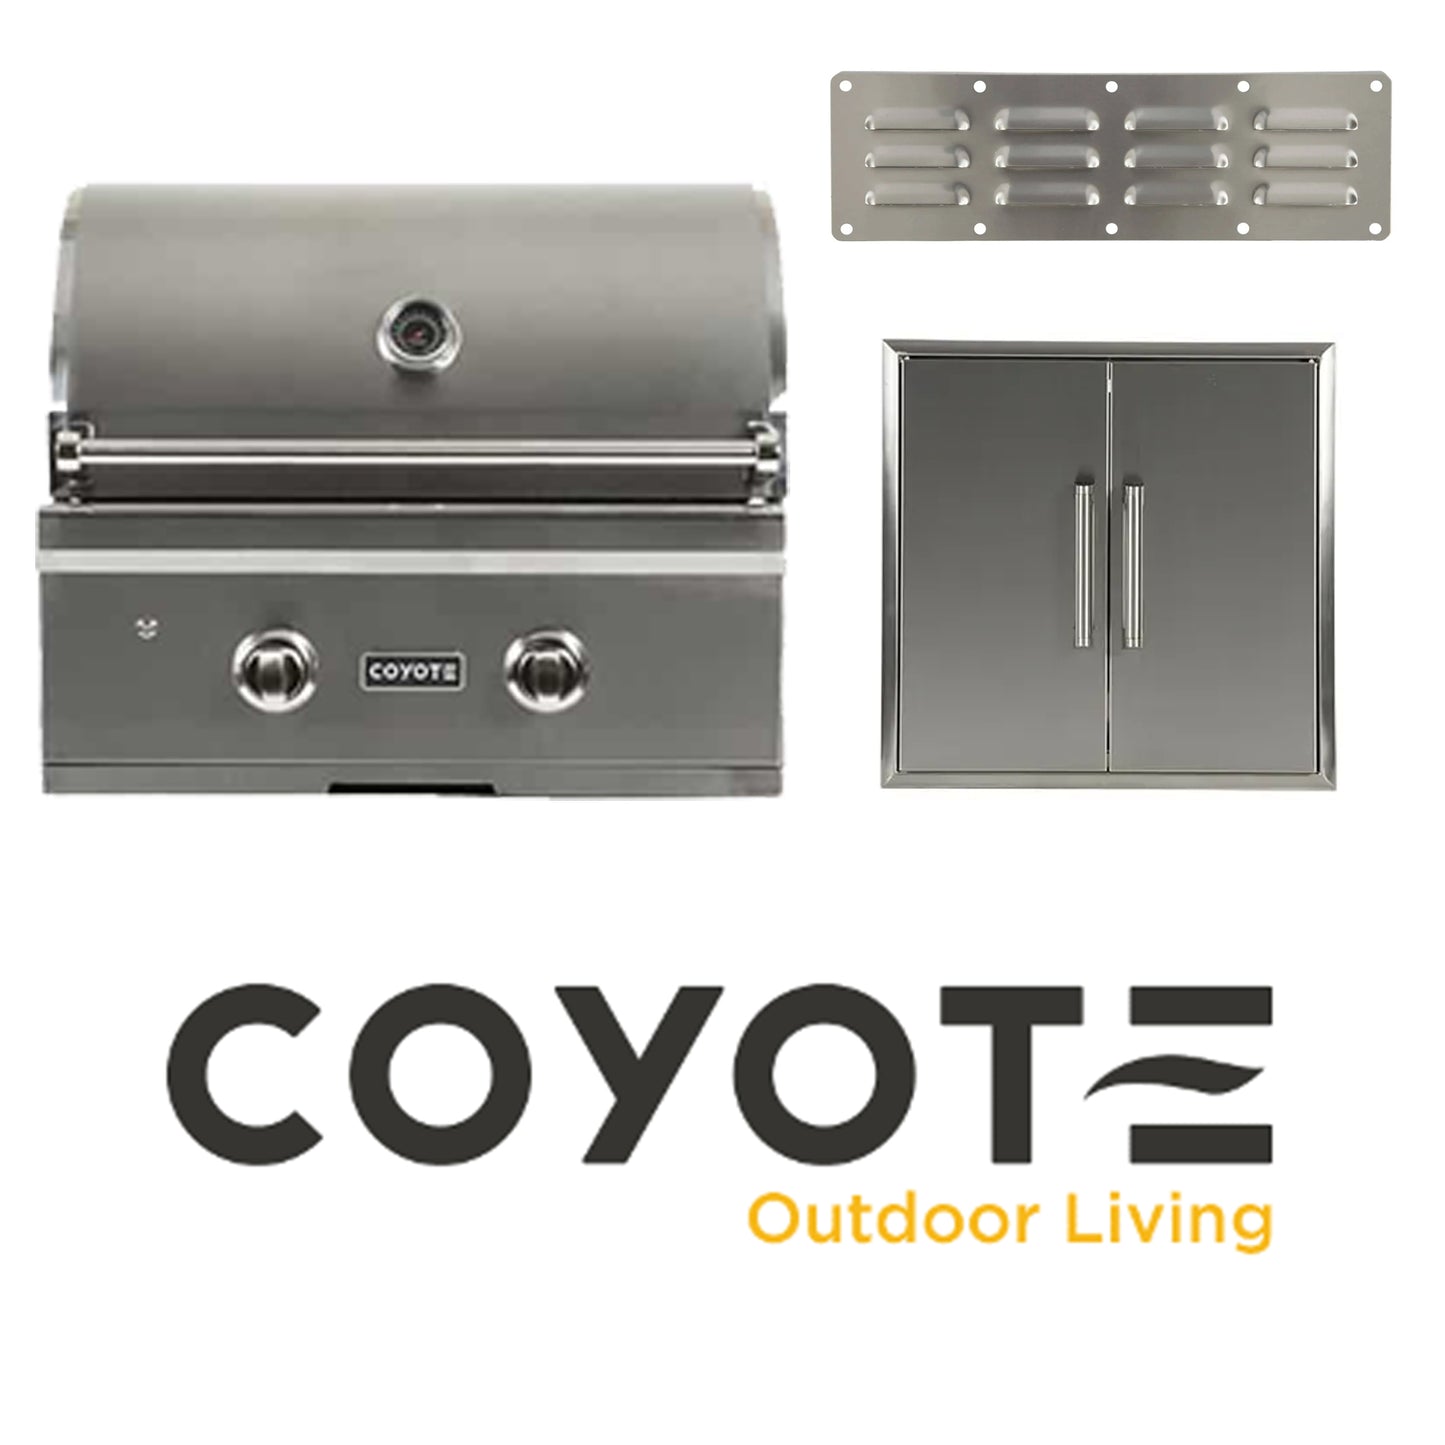 Coyote 28" C-Series Built-In Grill Package